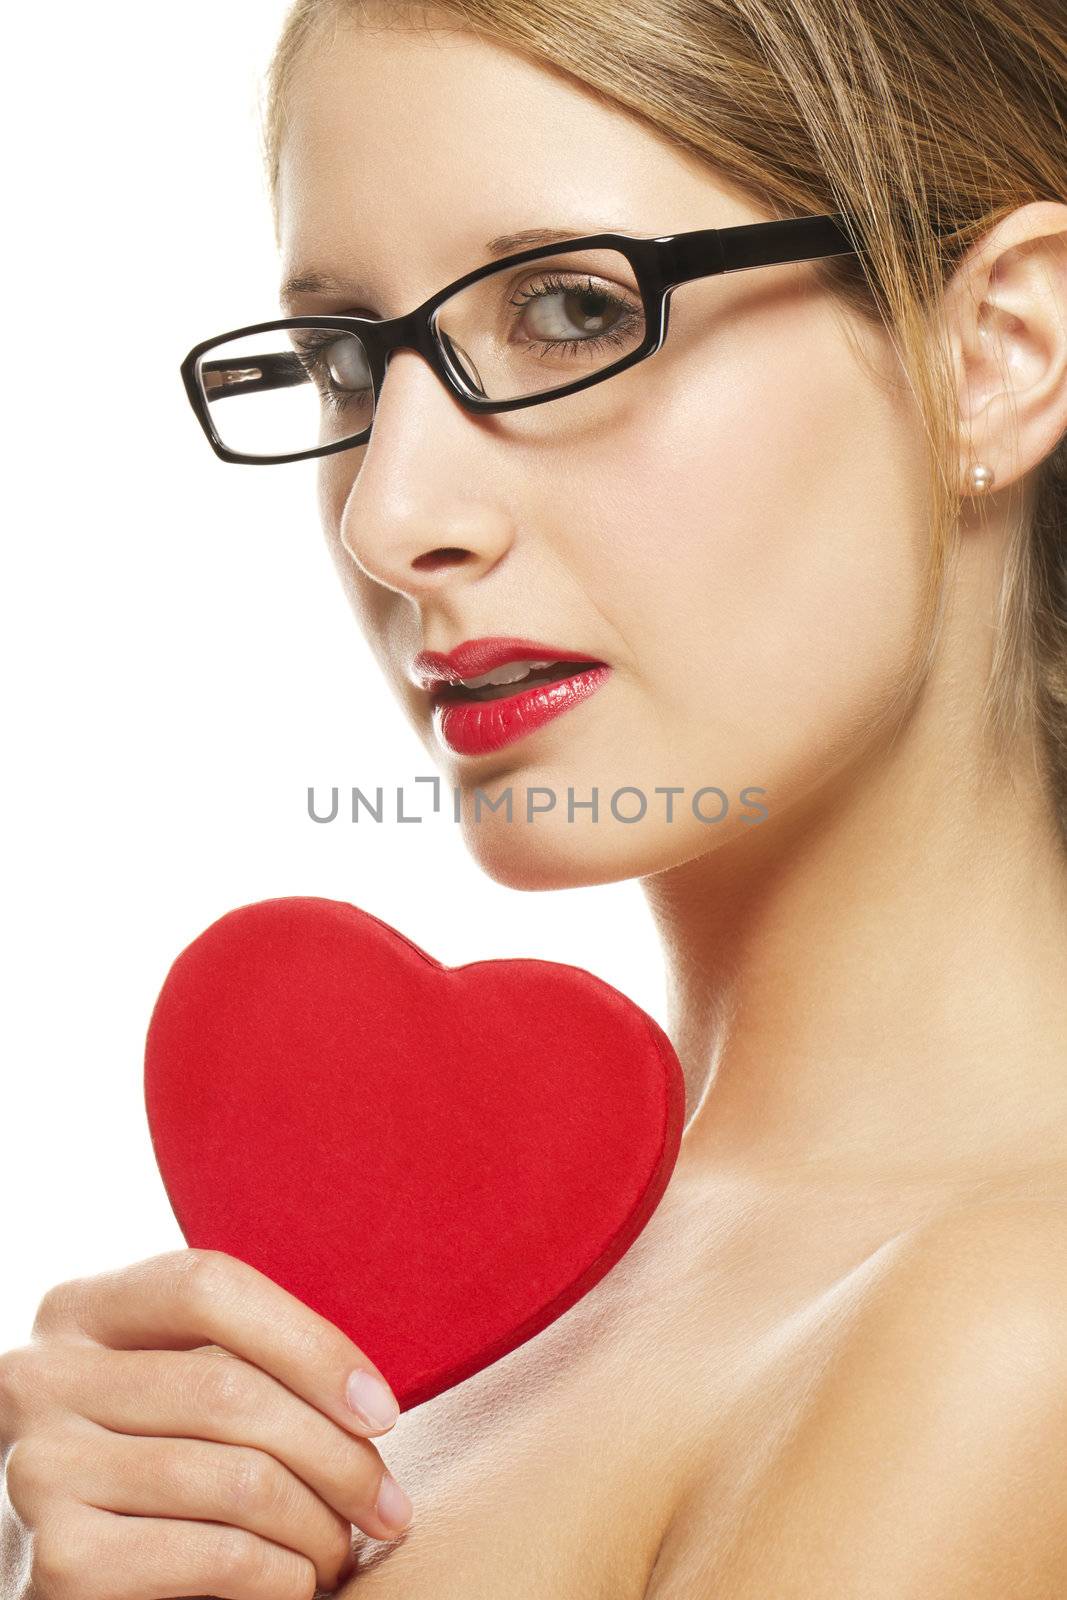 beautiful woman with glasses holding red heart on white background